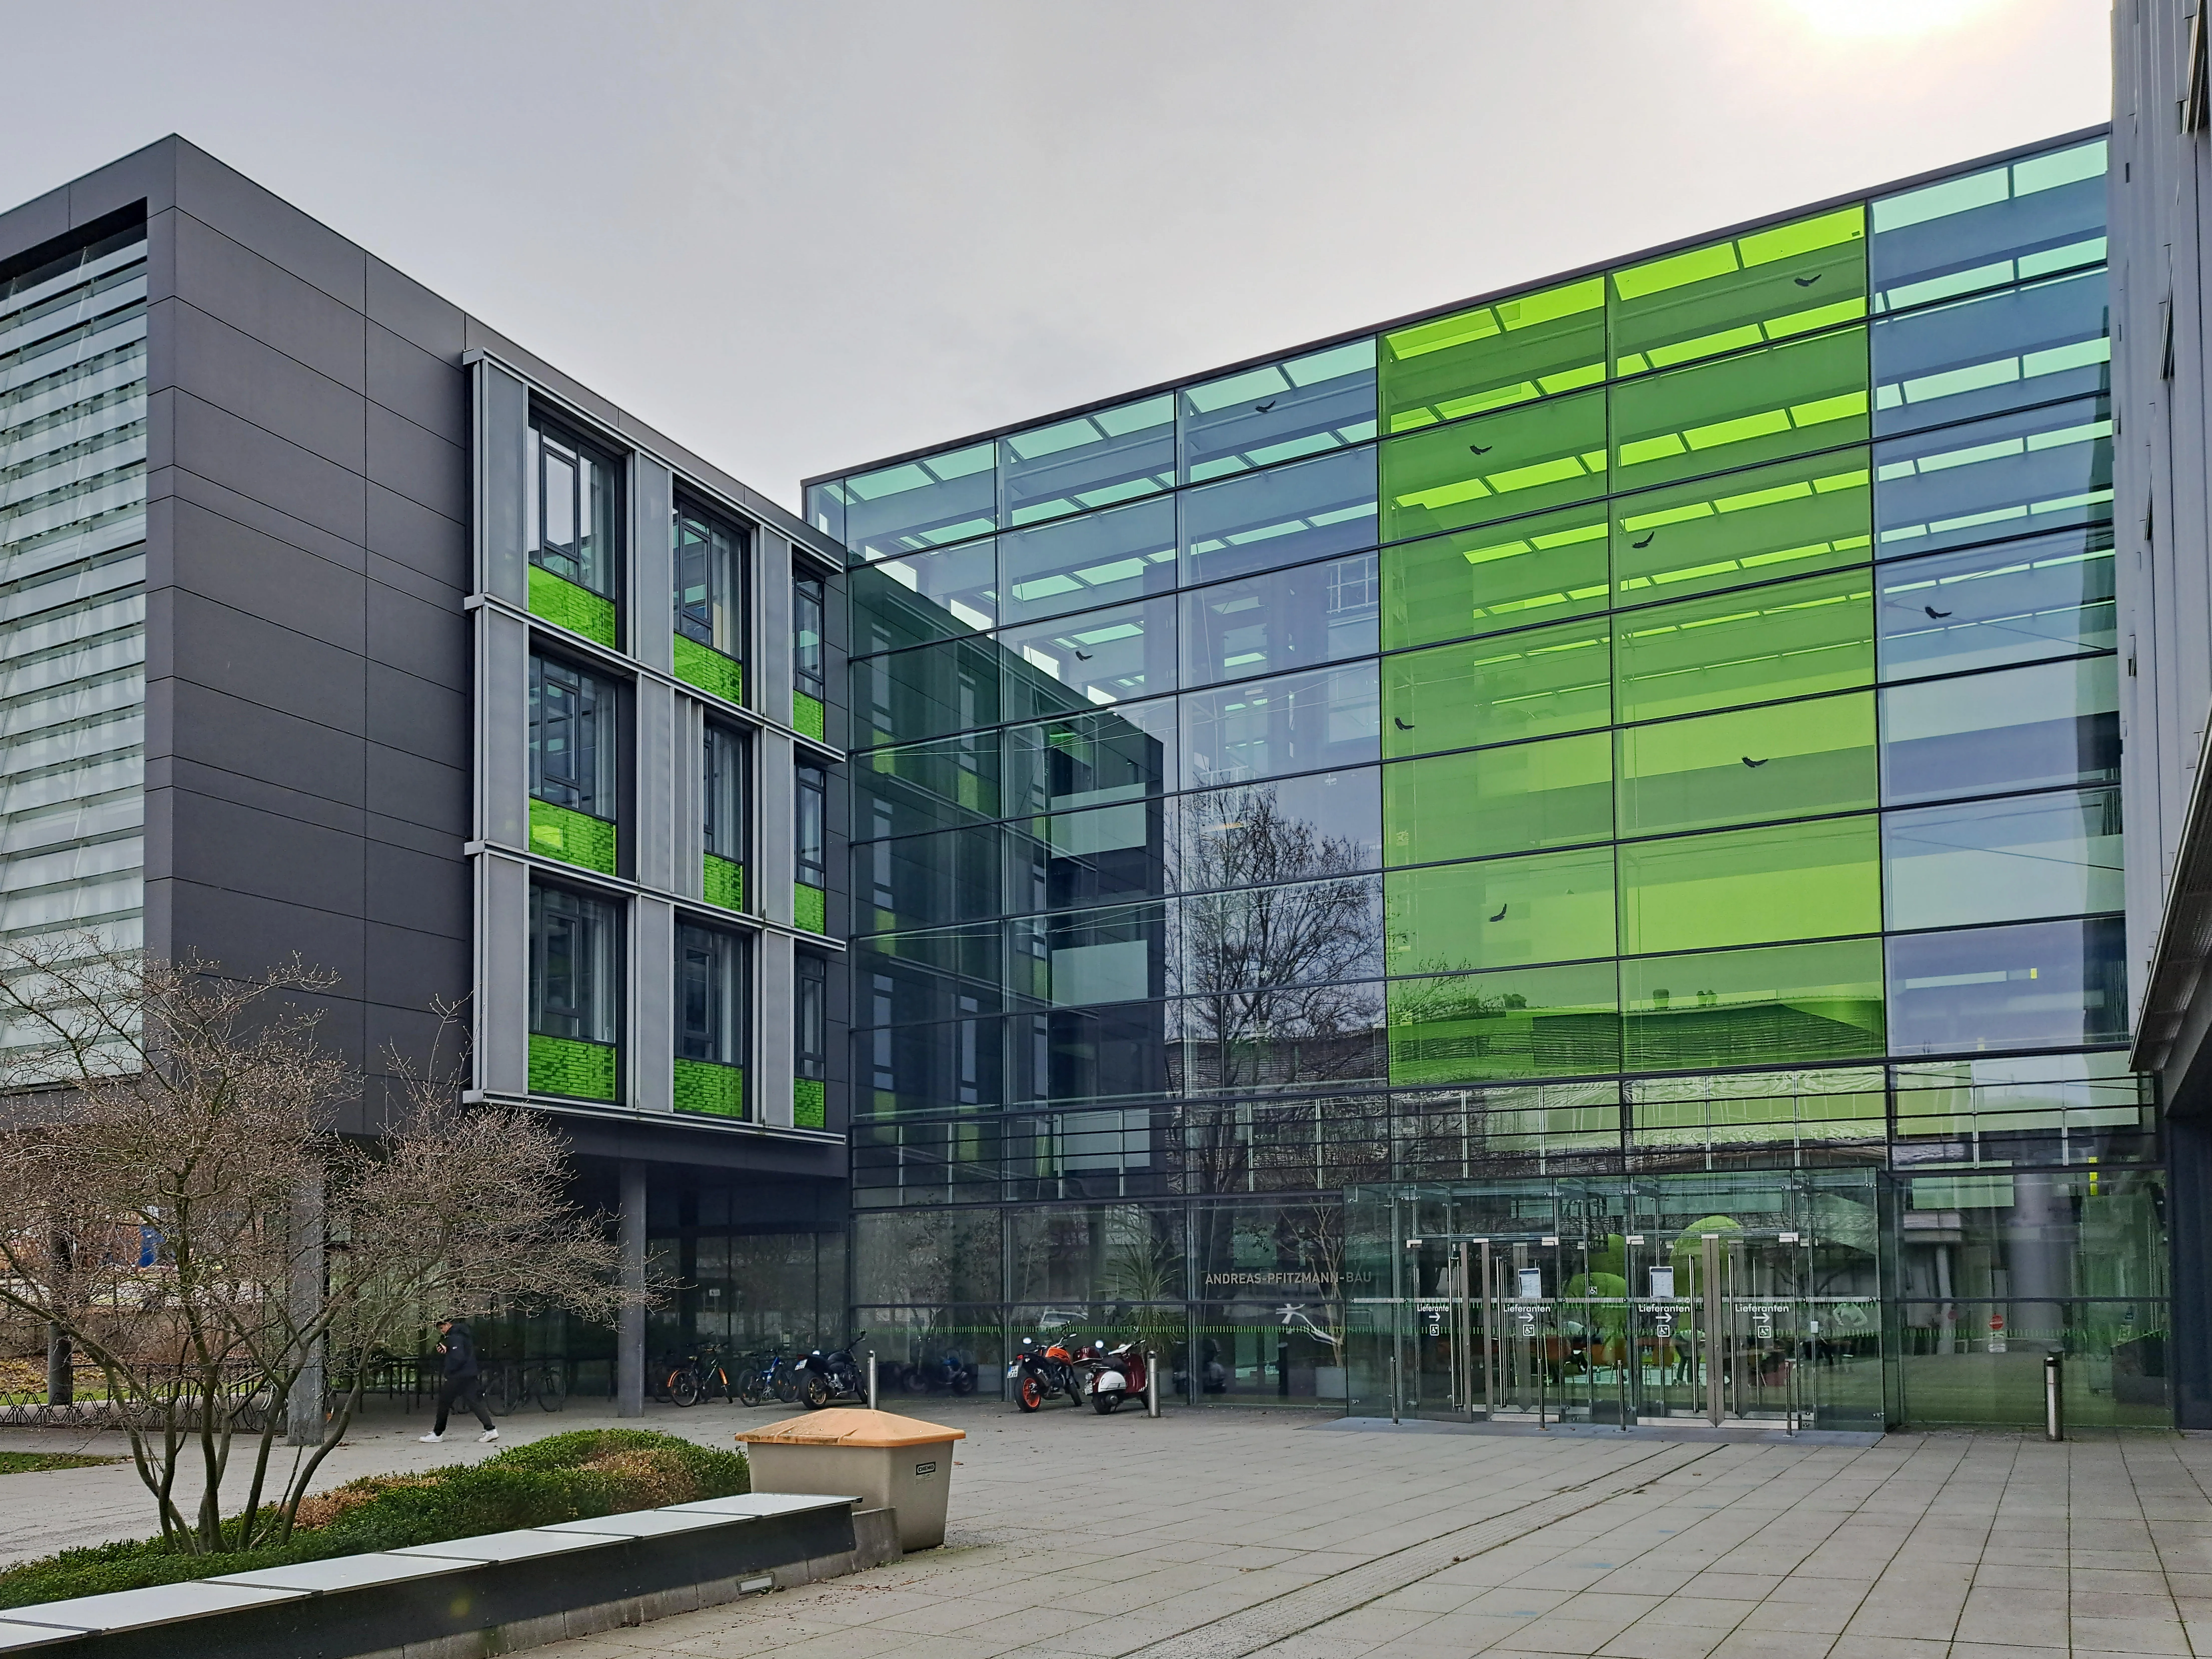 “Andreas-Pfitzmann-Bau” (“Andreas Pfitzmann building”), residence of the Faculty of Informatics at TU Dresden and main venue of JELIA, in the district of Plauen.